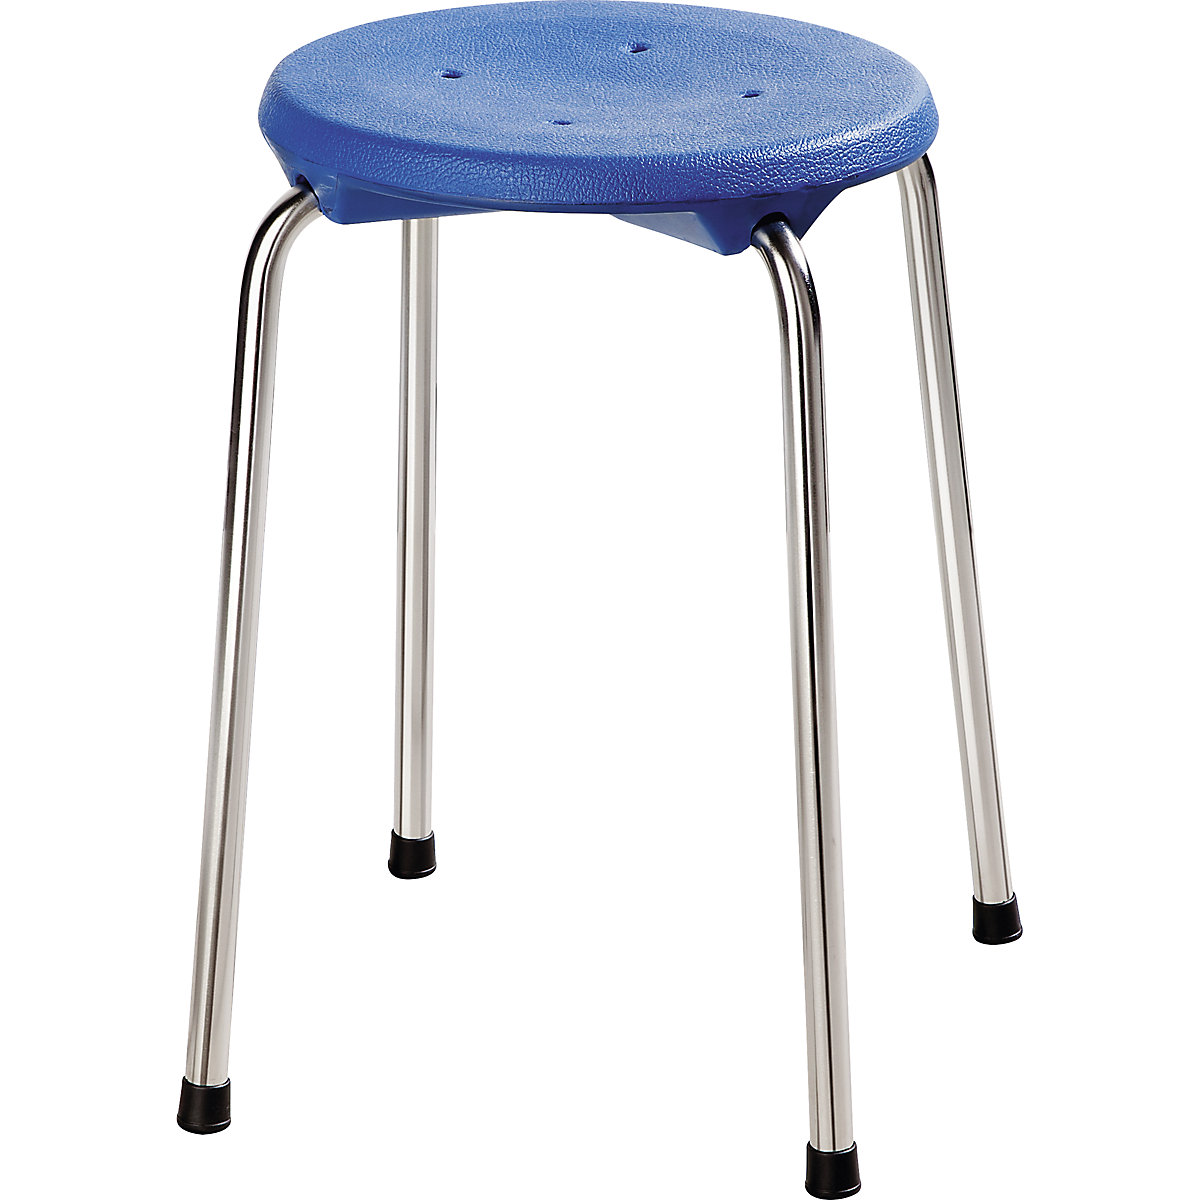 Stainless steel stacking stool